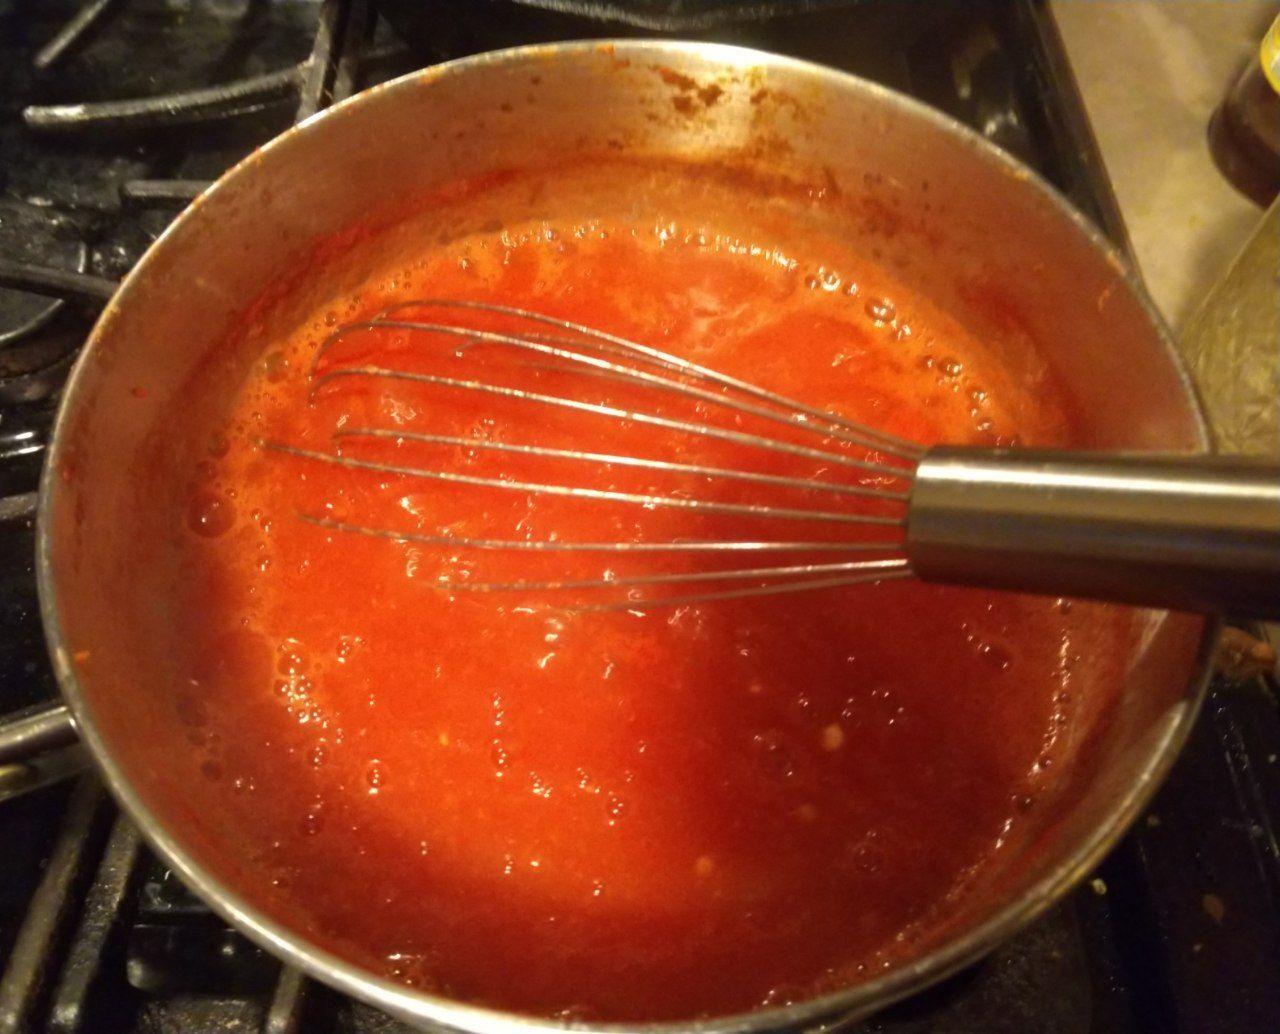 Ketchup cooking in a pot.